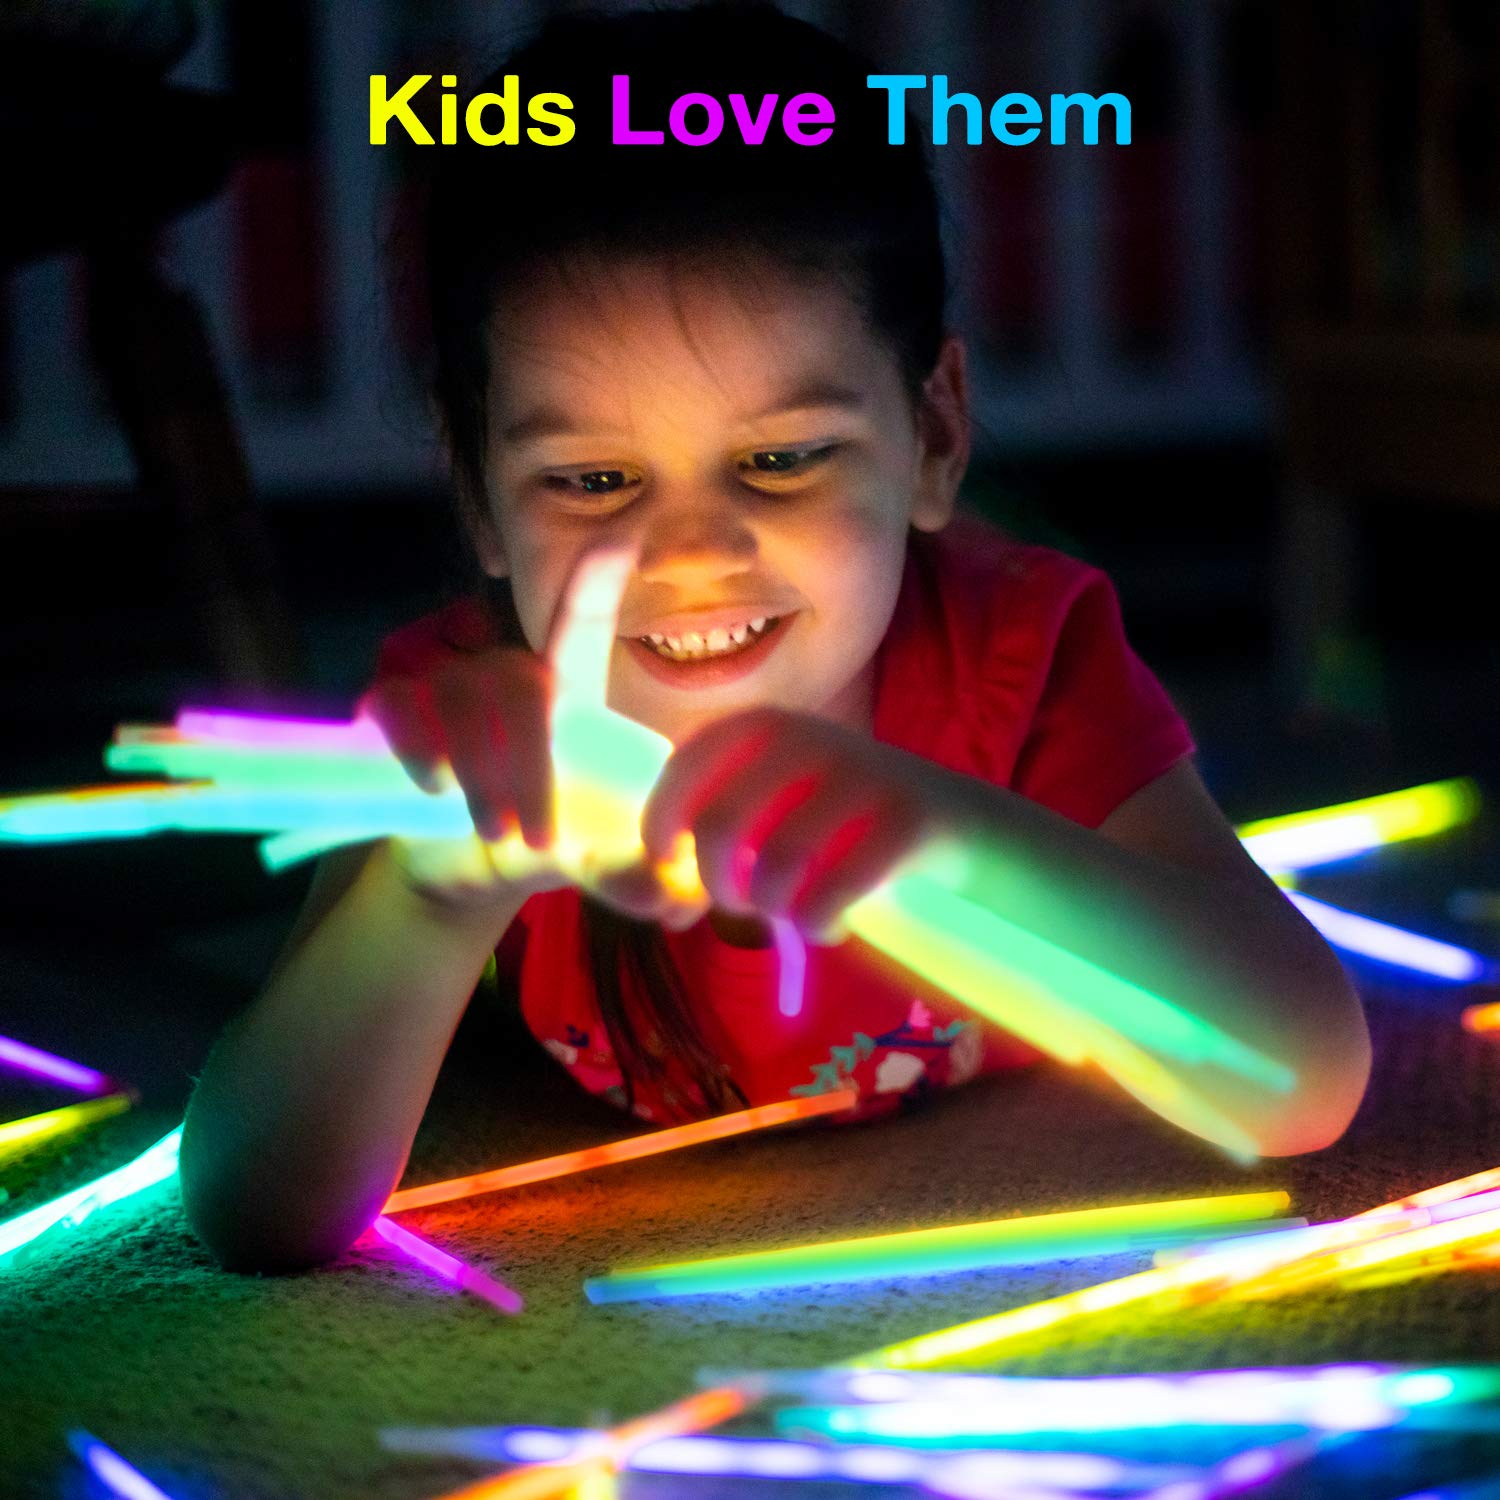 300 Glow Sticks Bulk Party Supplies - Halloween Glow in The Dark Fun Party Favors Pack with Connectors, Neon 8 inch Glowsticks Bracelets and Necklaces